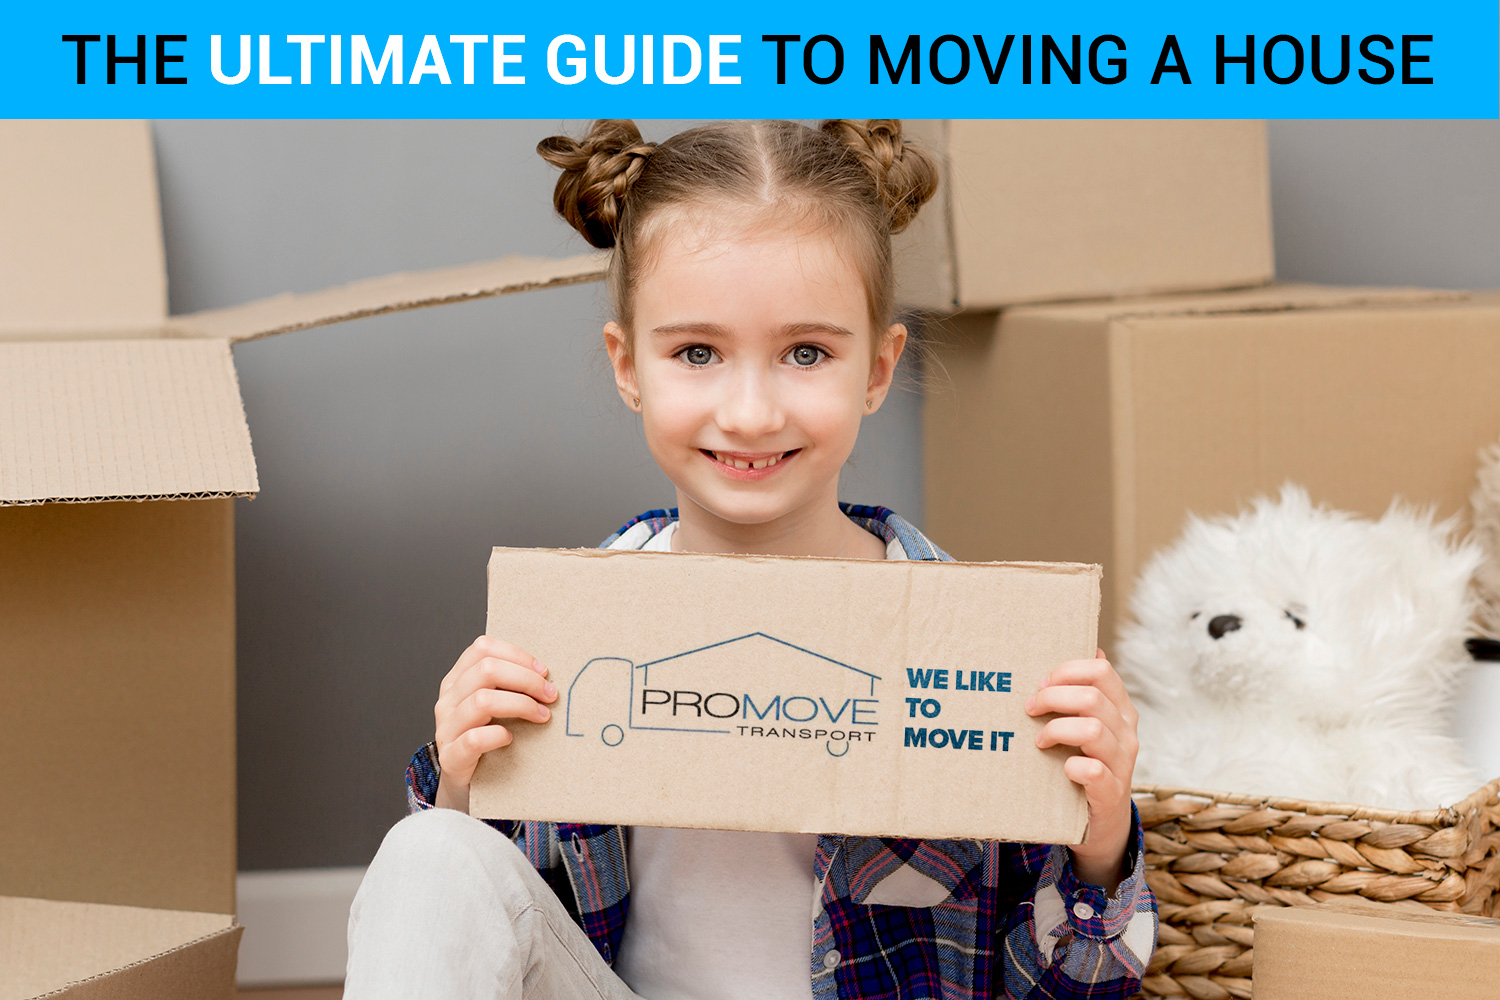 The Ultimate Guide to Moving a House